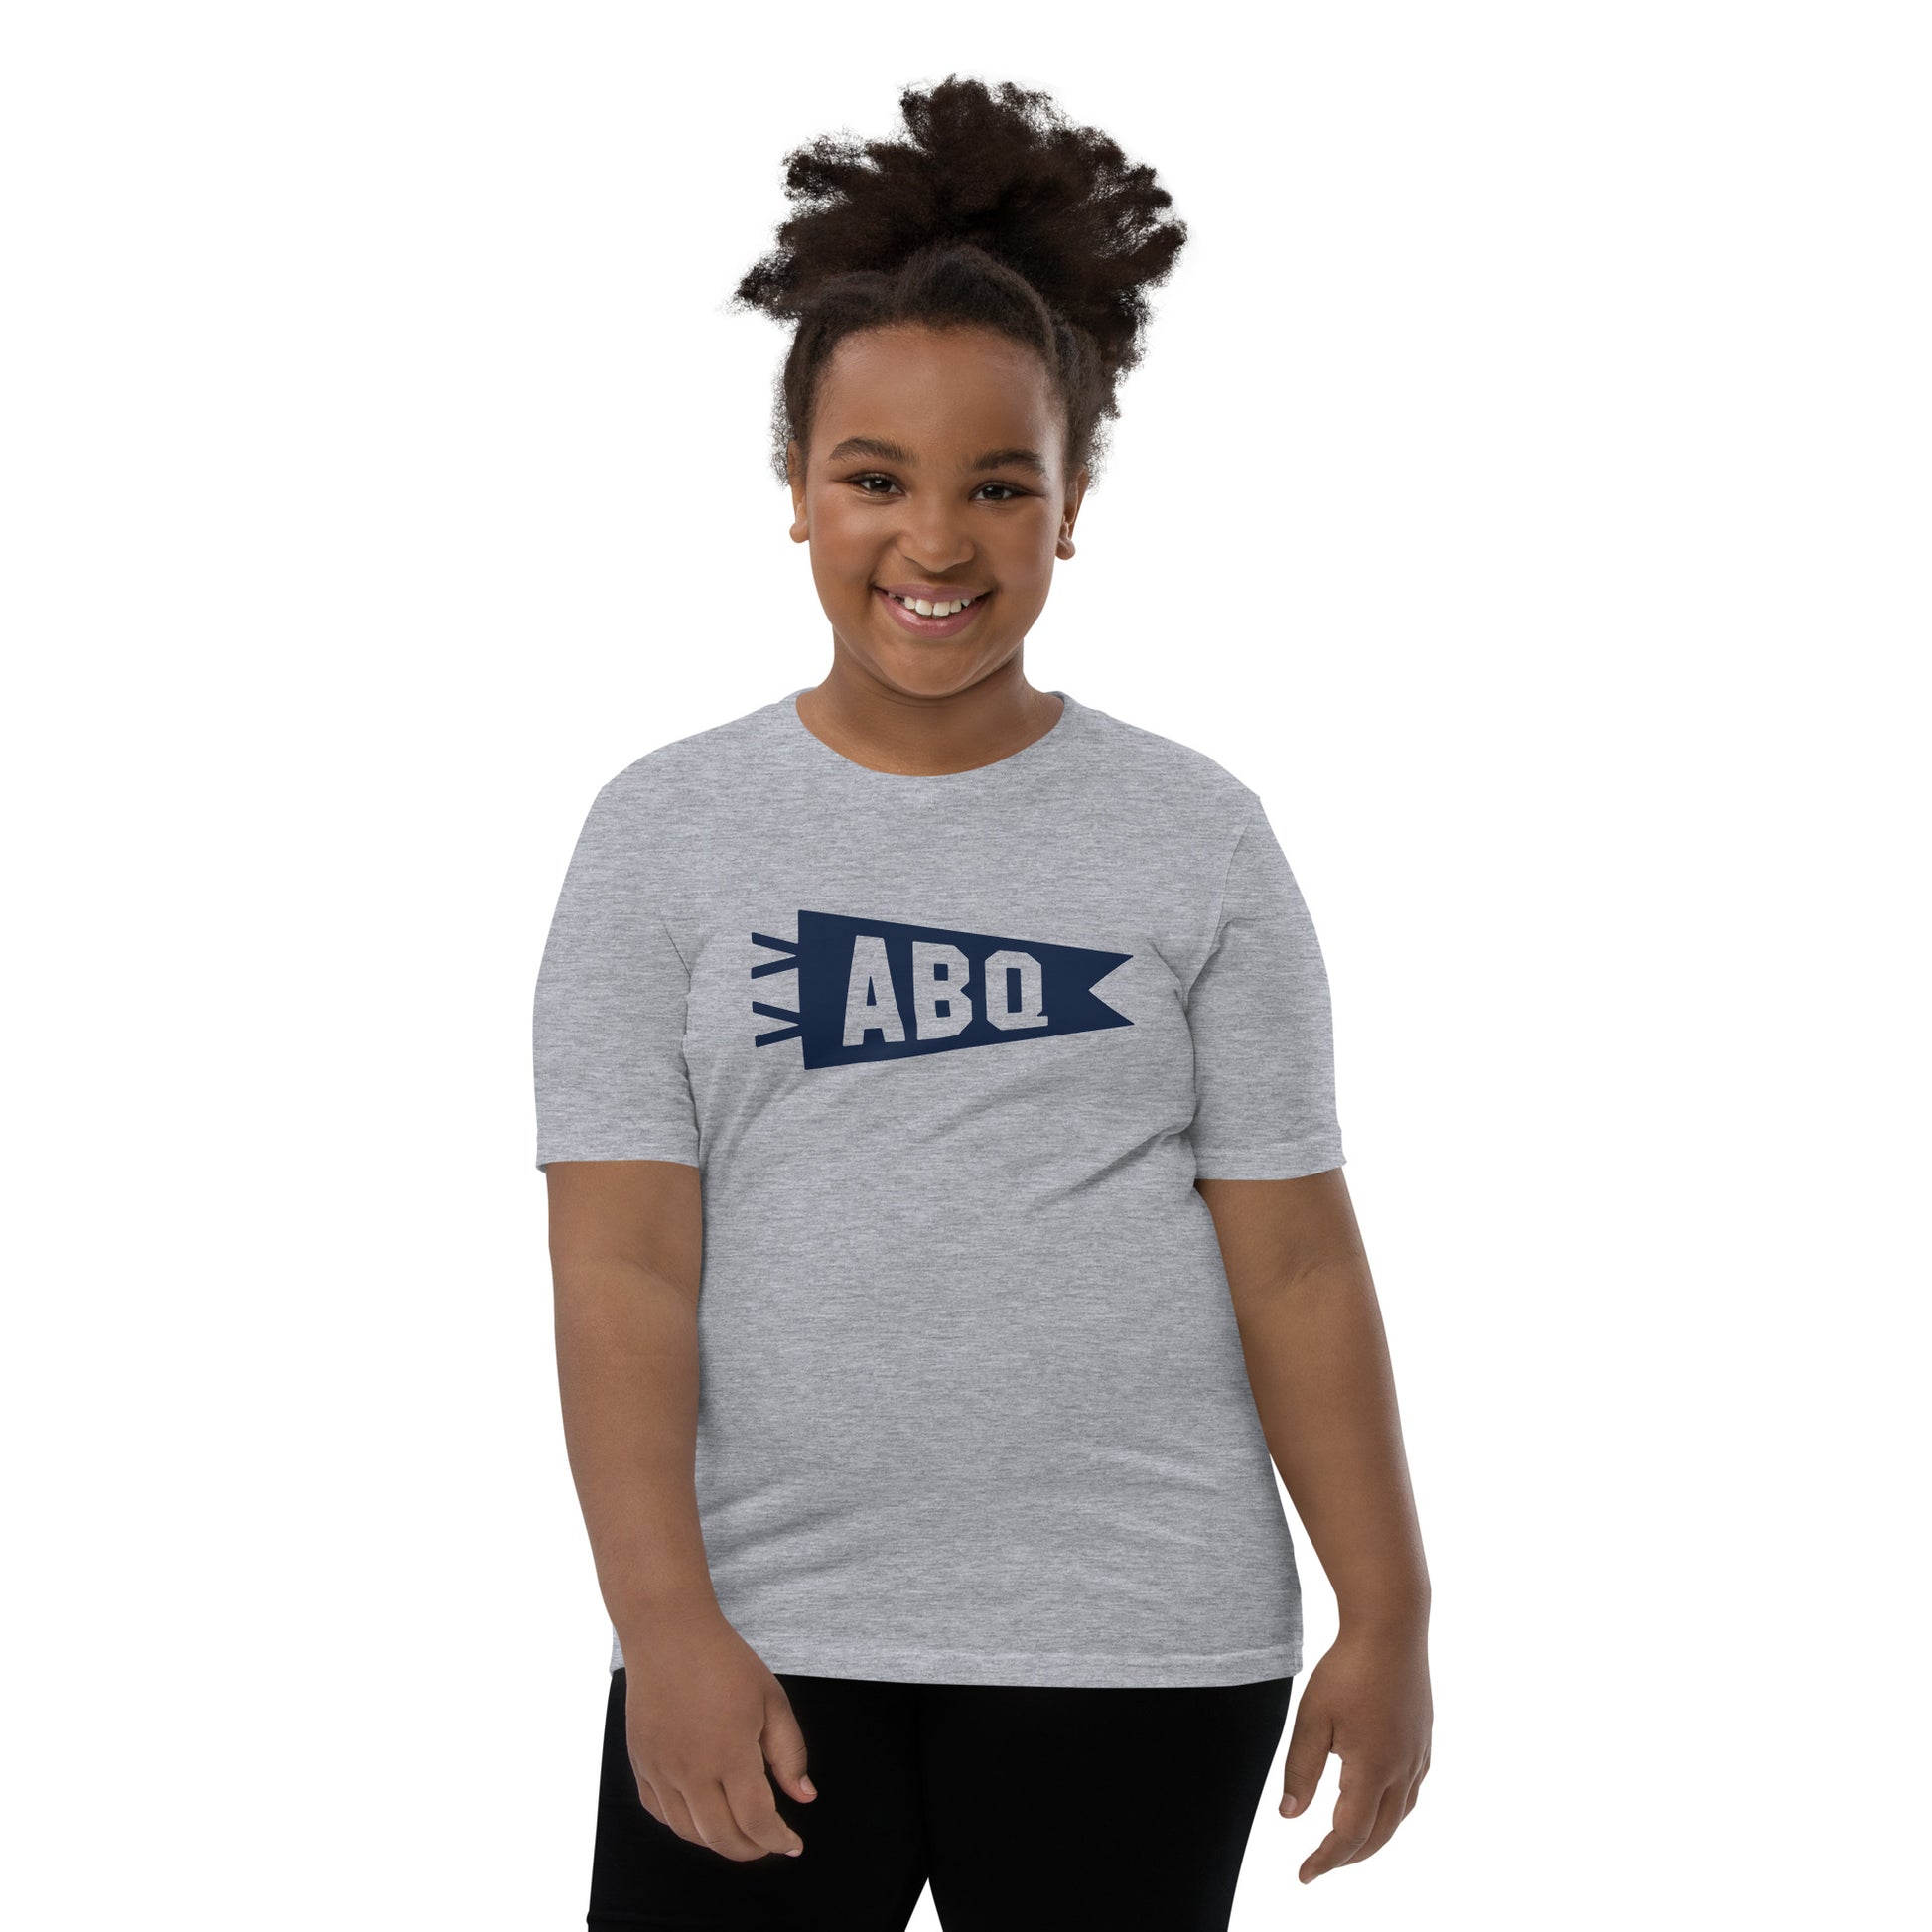 Kid's Airport Code Tee - Navy Blue Graphic • ABQ Albuquerque • YHM Designs - Image 05